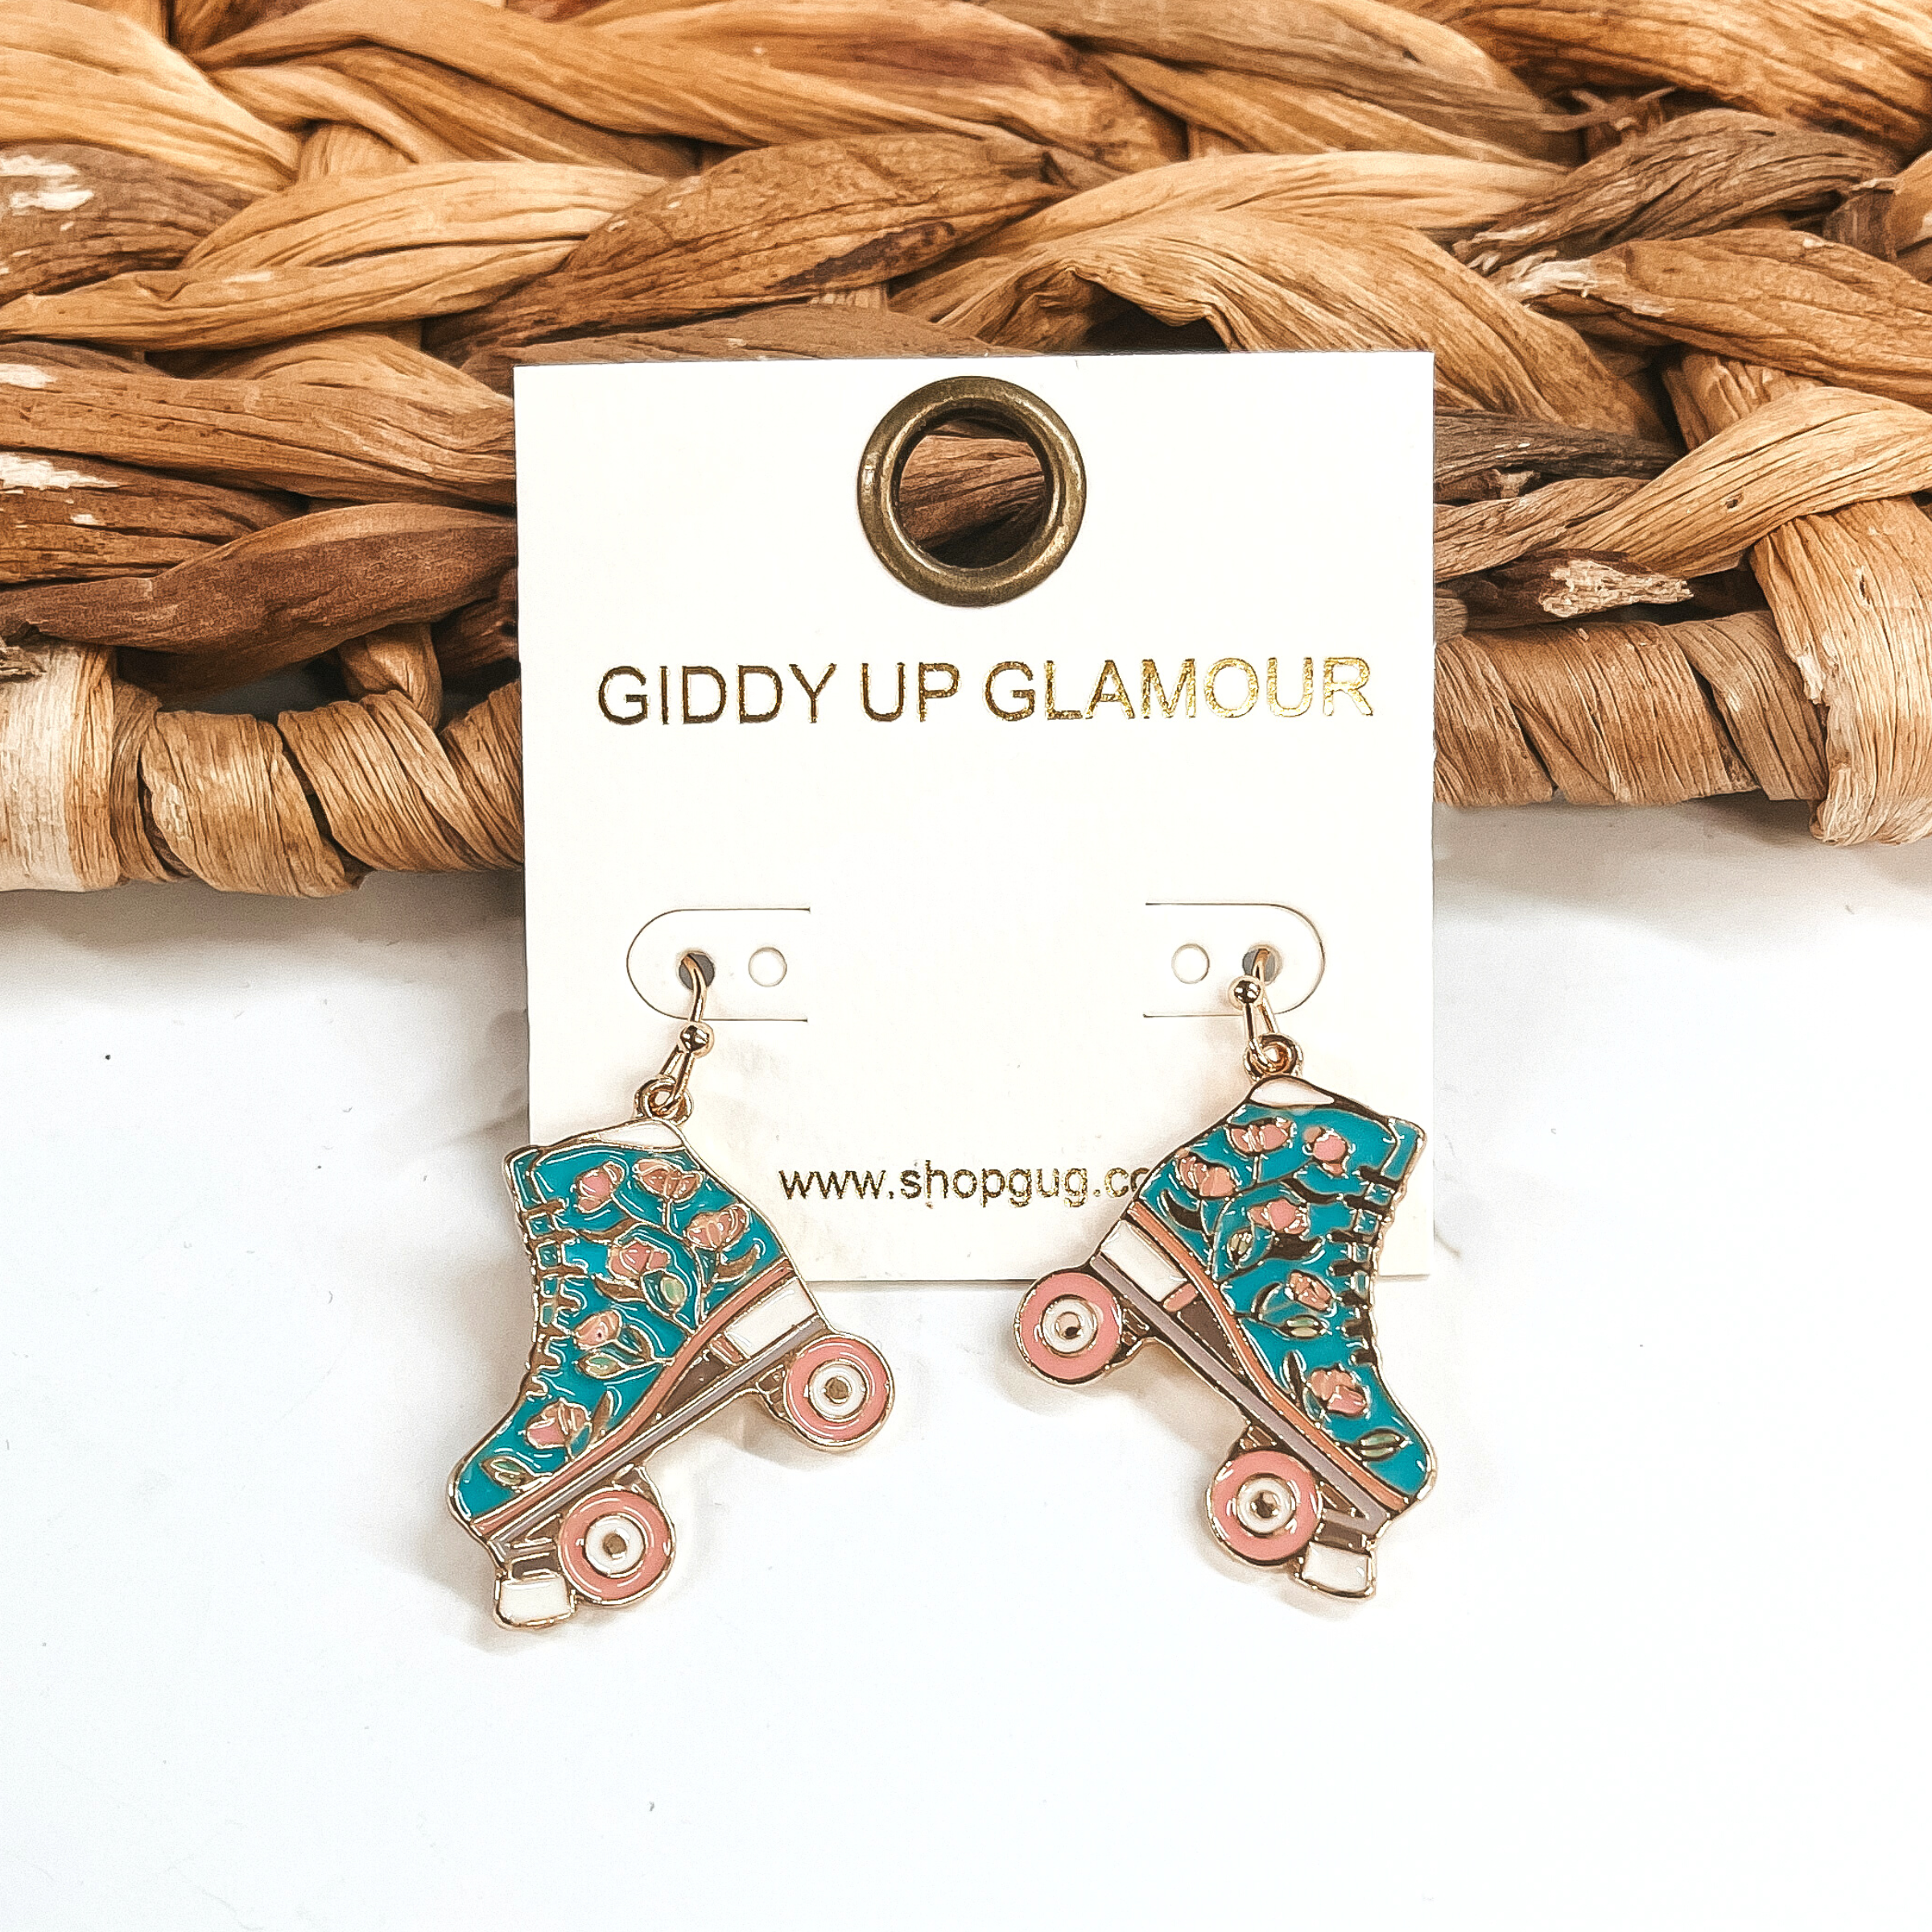 These are turquoise rollerskate earrings in a gold setting. There is a mix of different  colors such as turquoise, light pink and white. There are light pink flowers on the  rollerskate.  These earrings are taken leaning up against a brown woven slate and on a white  background.